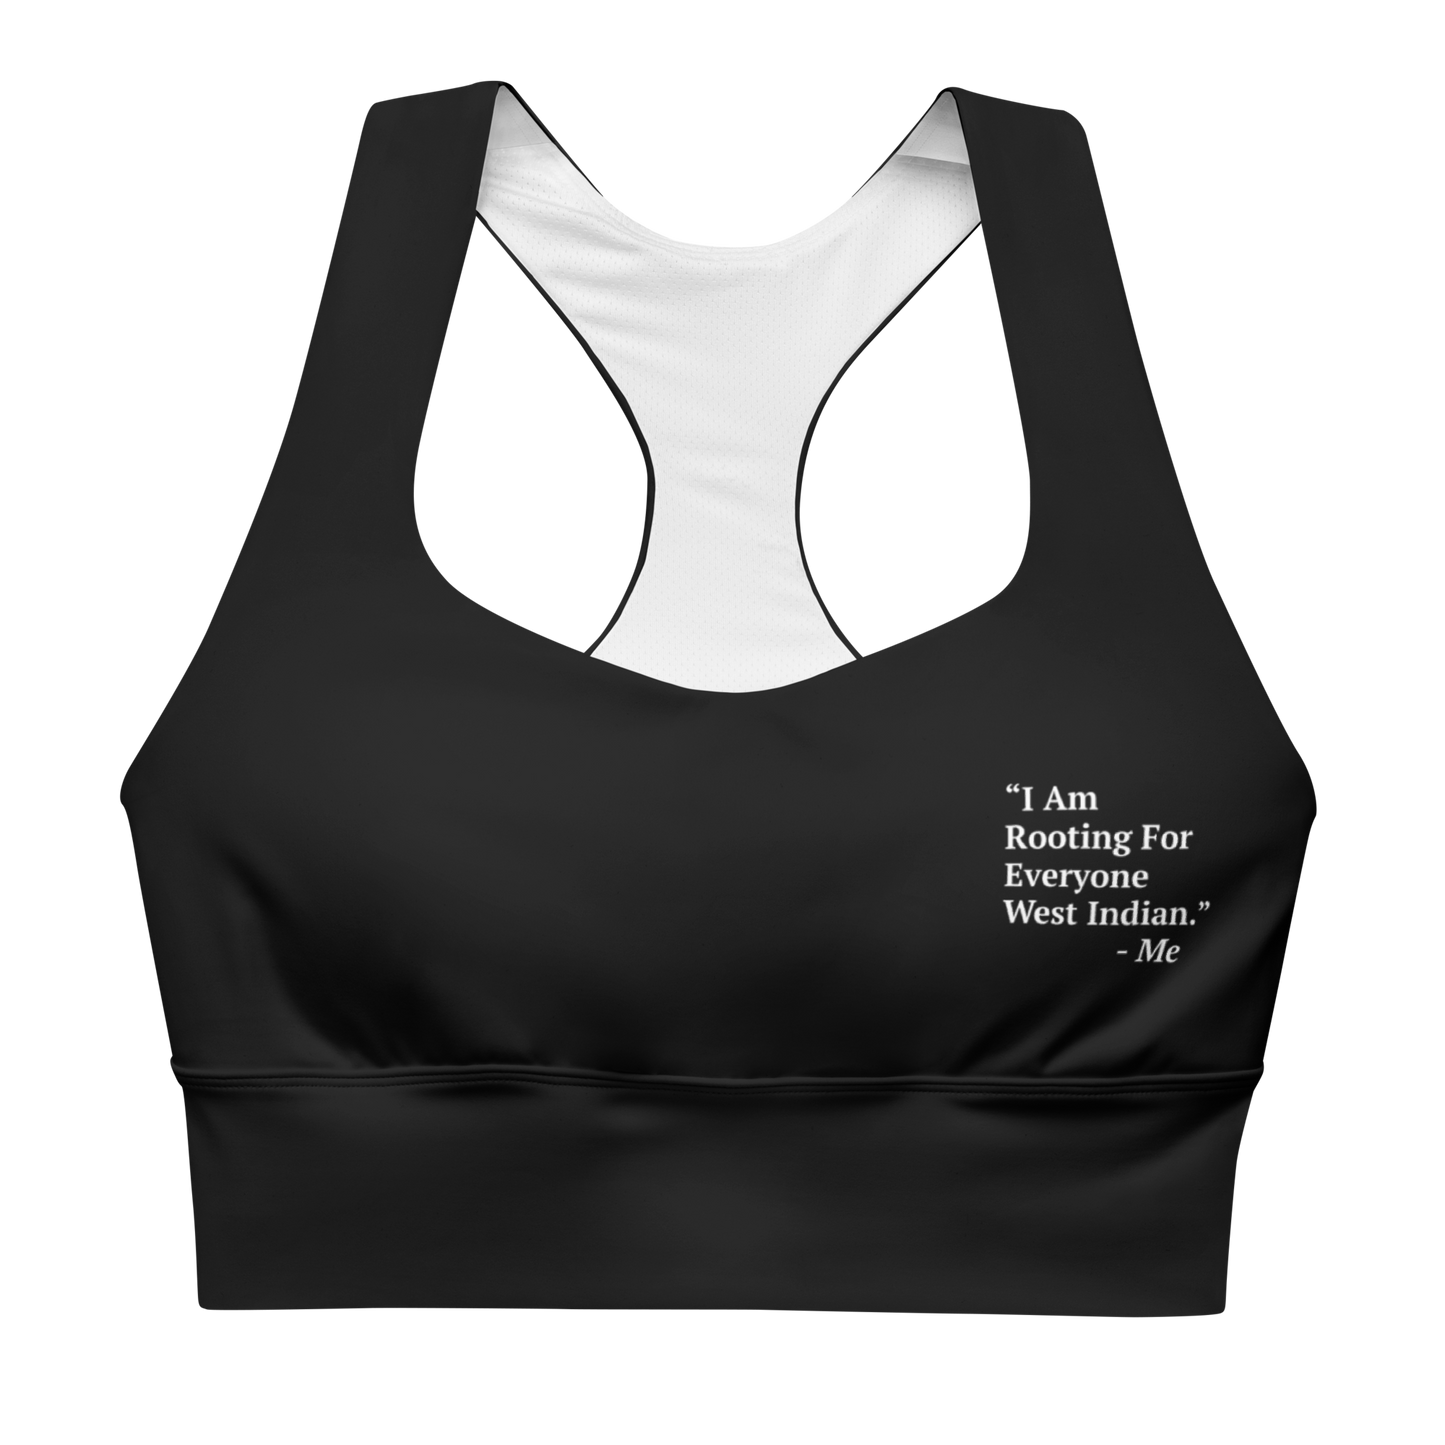 I Am Rooting: West Indian Longline sports bra